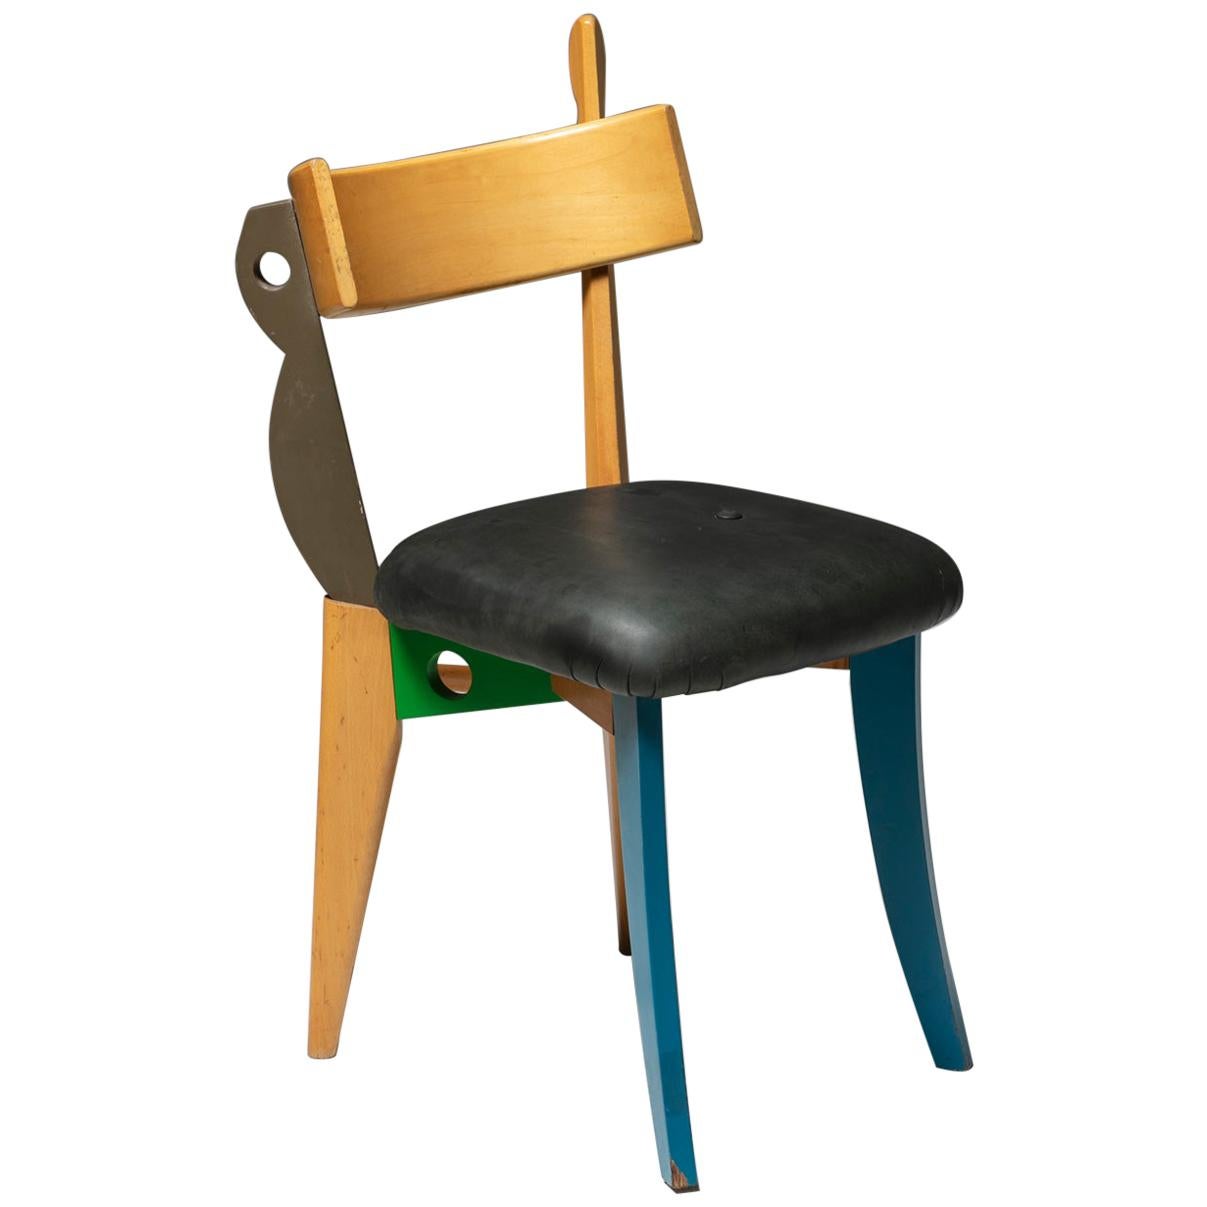 "Quasimodo" Chair by Weil and Taylor for Anthologie Quartett